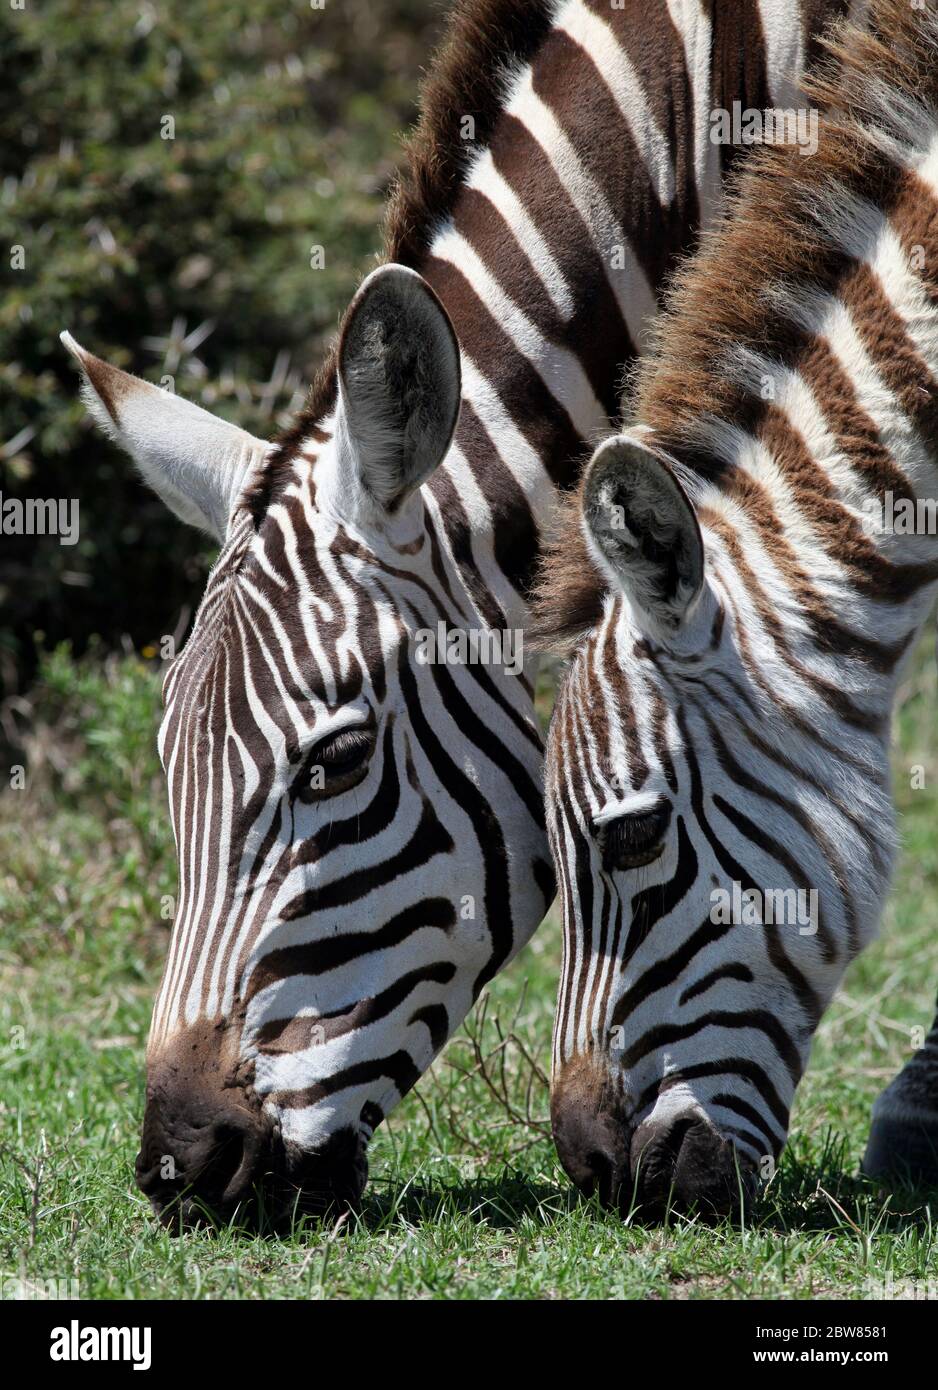 Close-up of the heads of two zebras while grazing Stock Photo